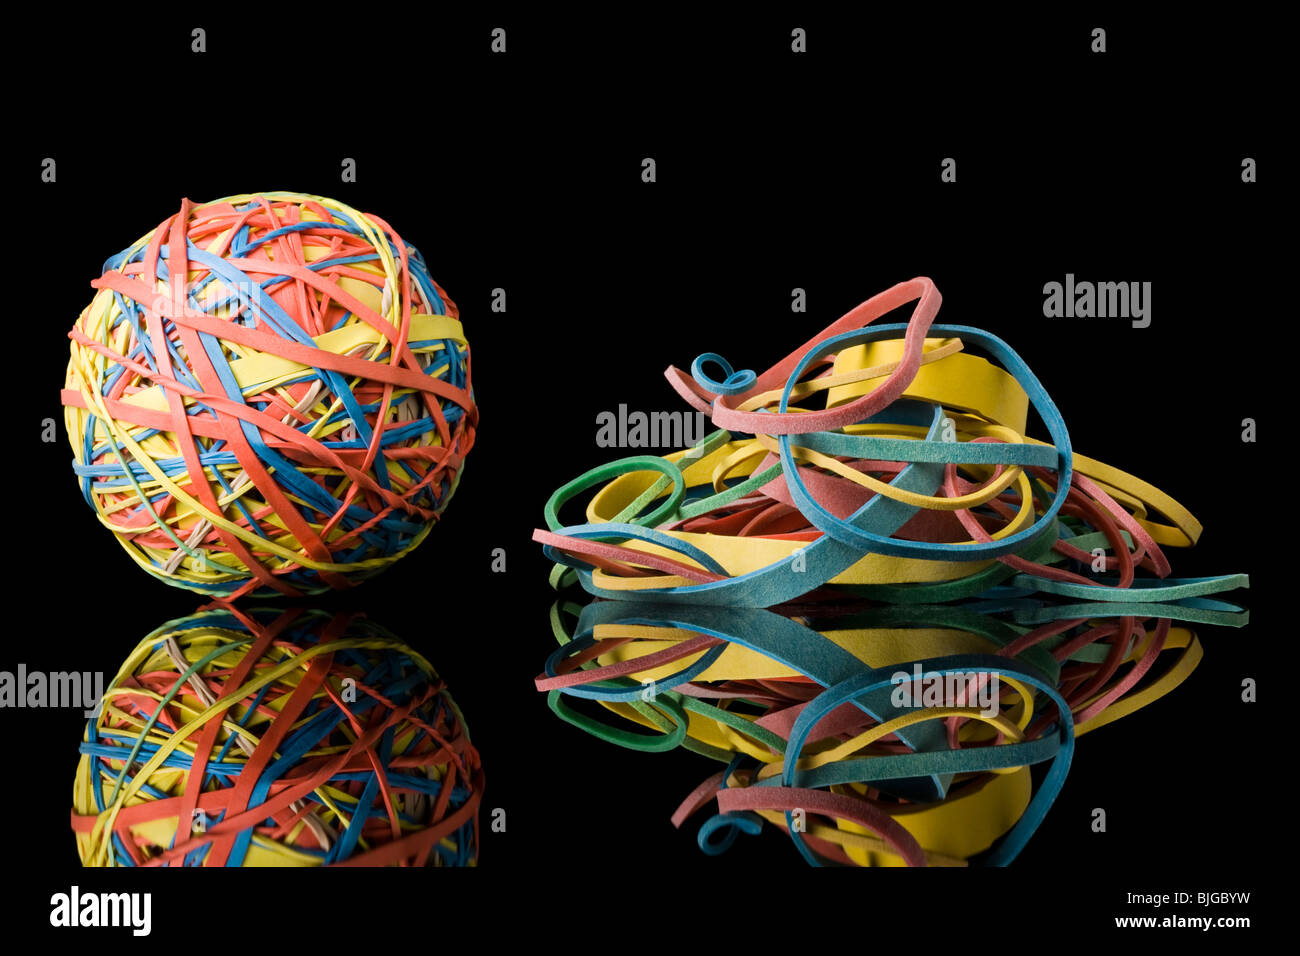 rubber band ball next to a pile of rubber bands Stock Photo